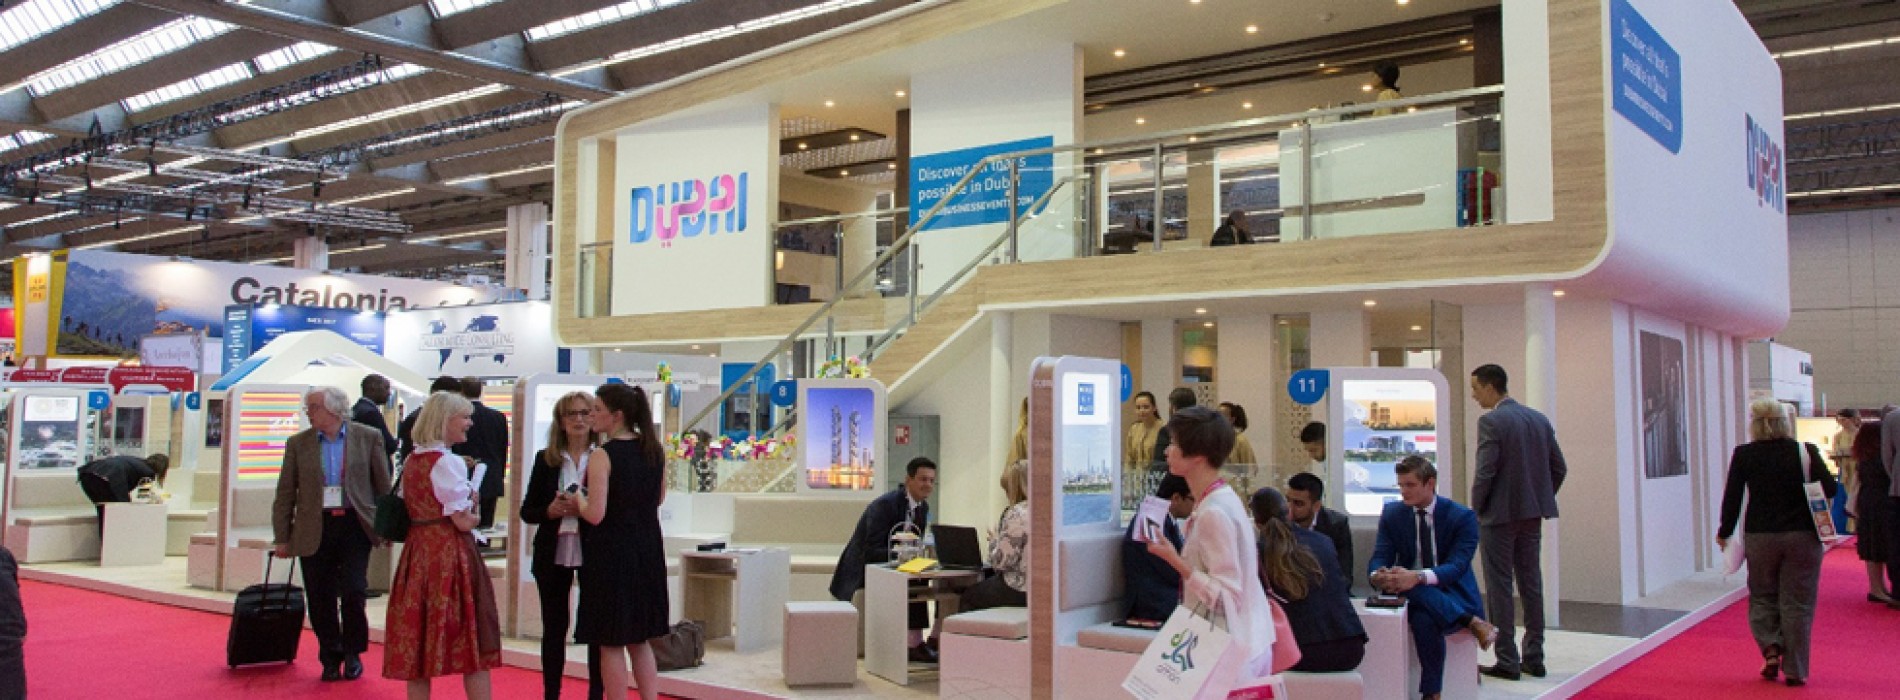 Dubai Business Events Gathers Momentum After Strong H1